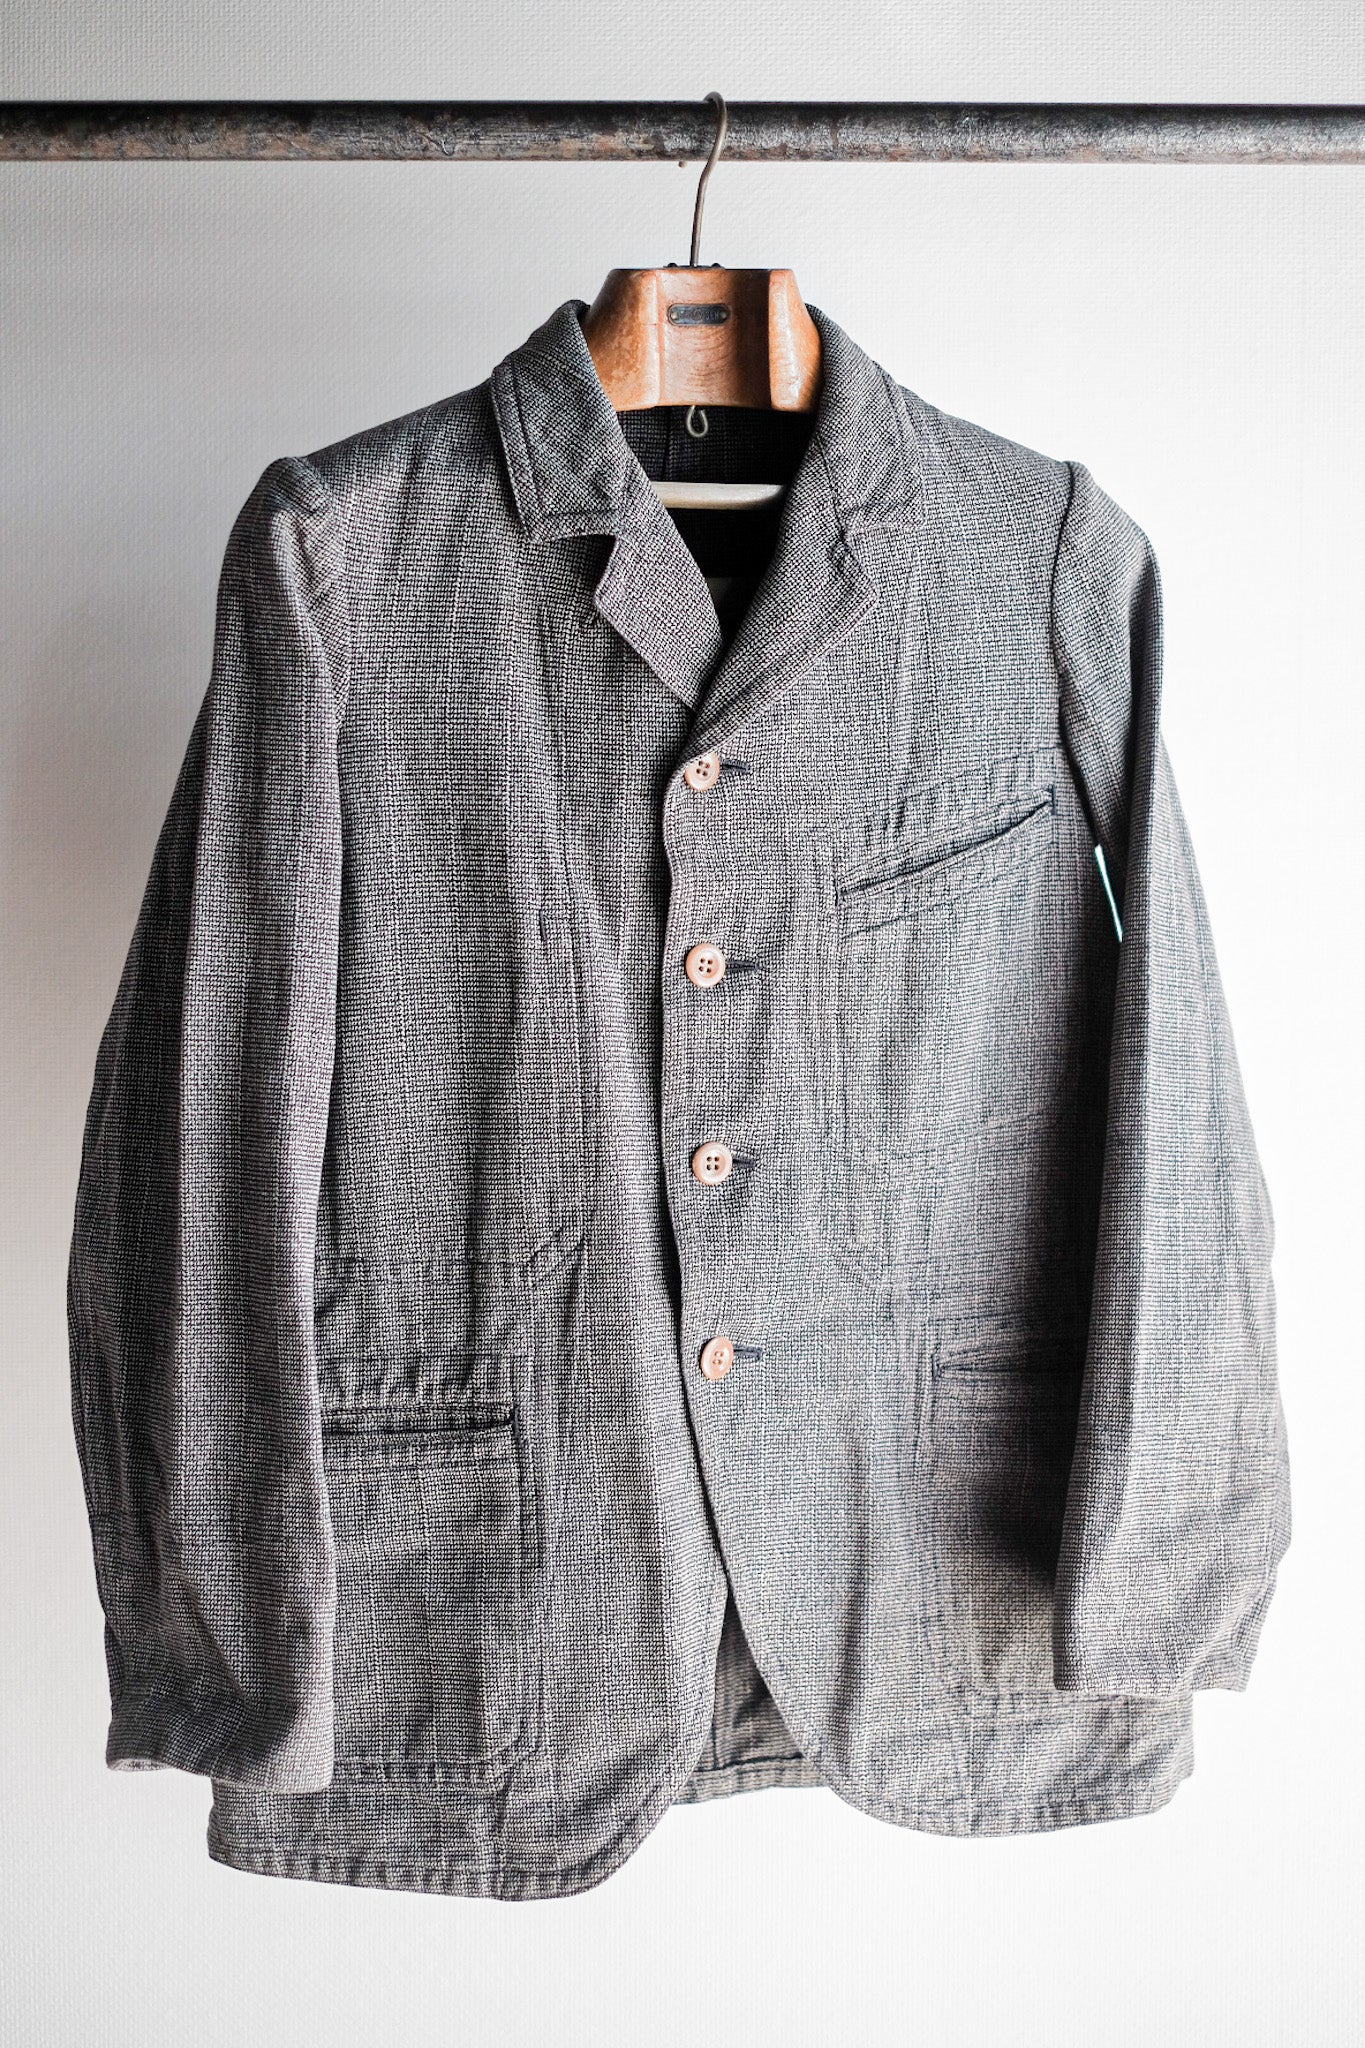 【~30's】French Vintage Cotton Checked Sack Jacket